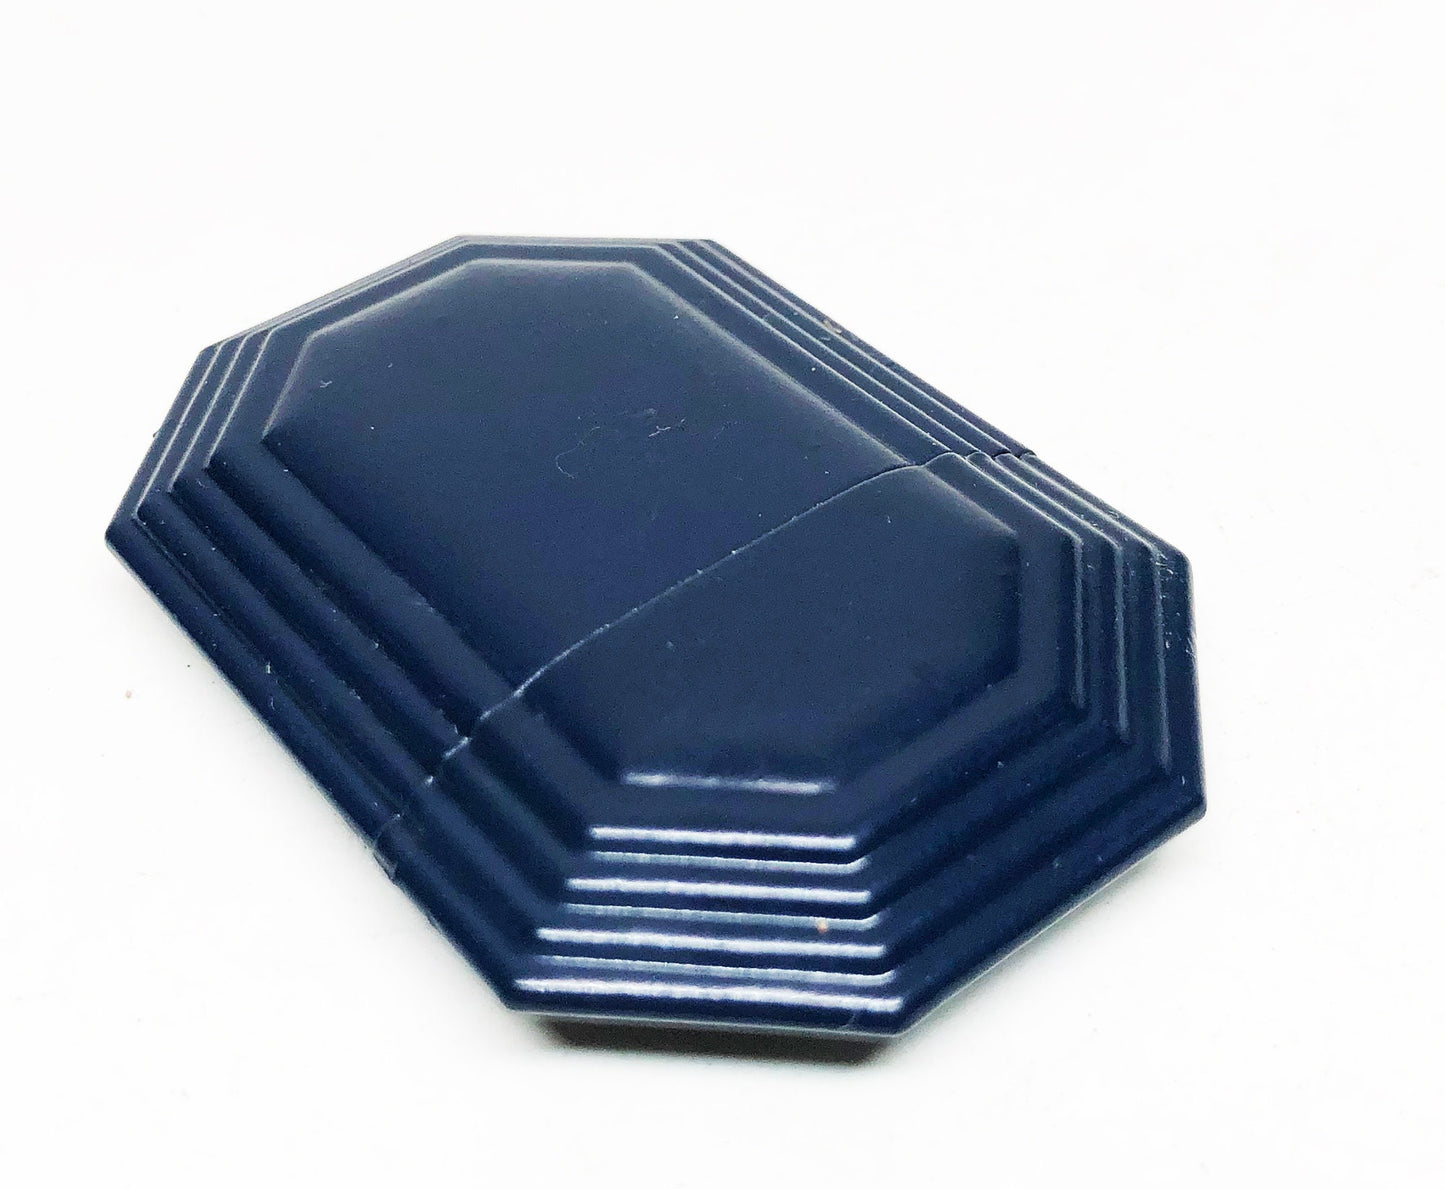 Working Eagle Blue Octagonal Lighter - Vintage 1930's Trench Style Blue Steel Sleeve Lighter in Original Box - Made in USA